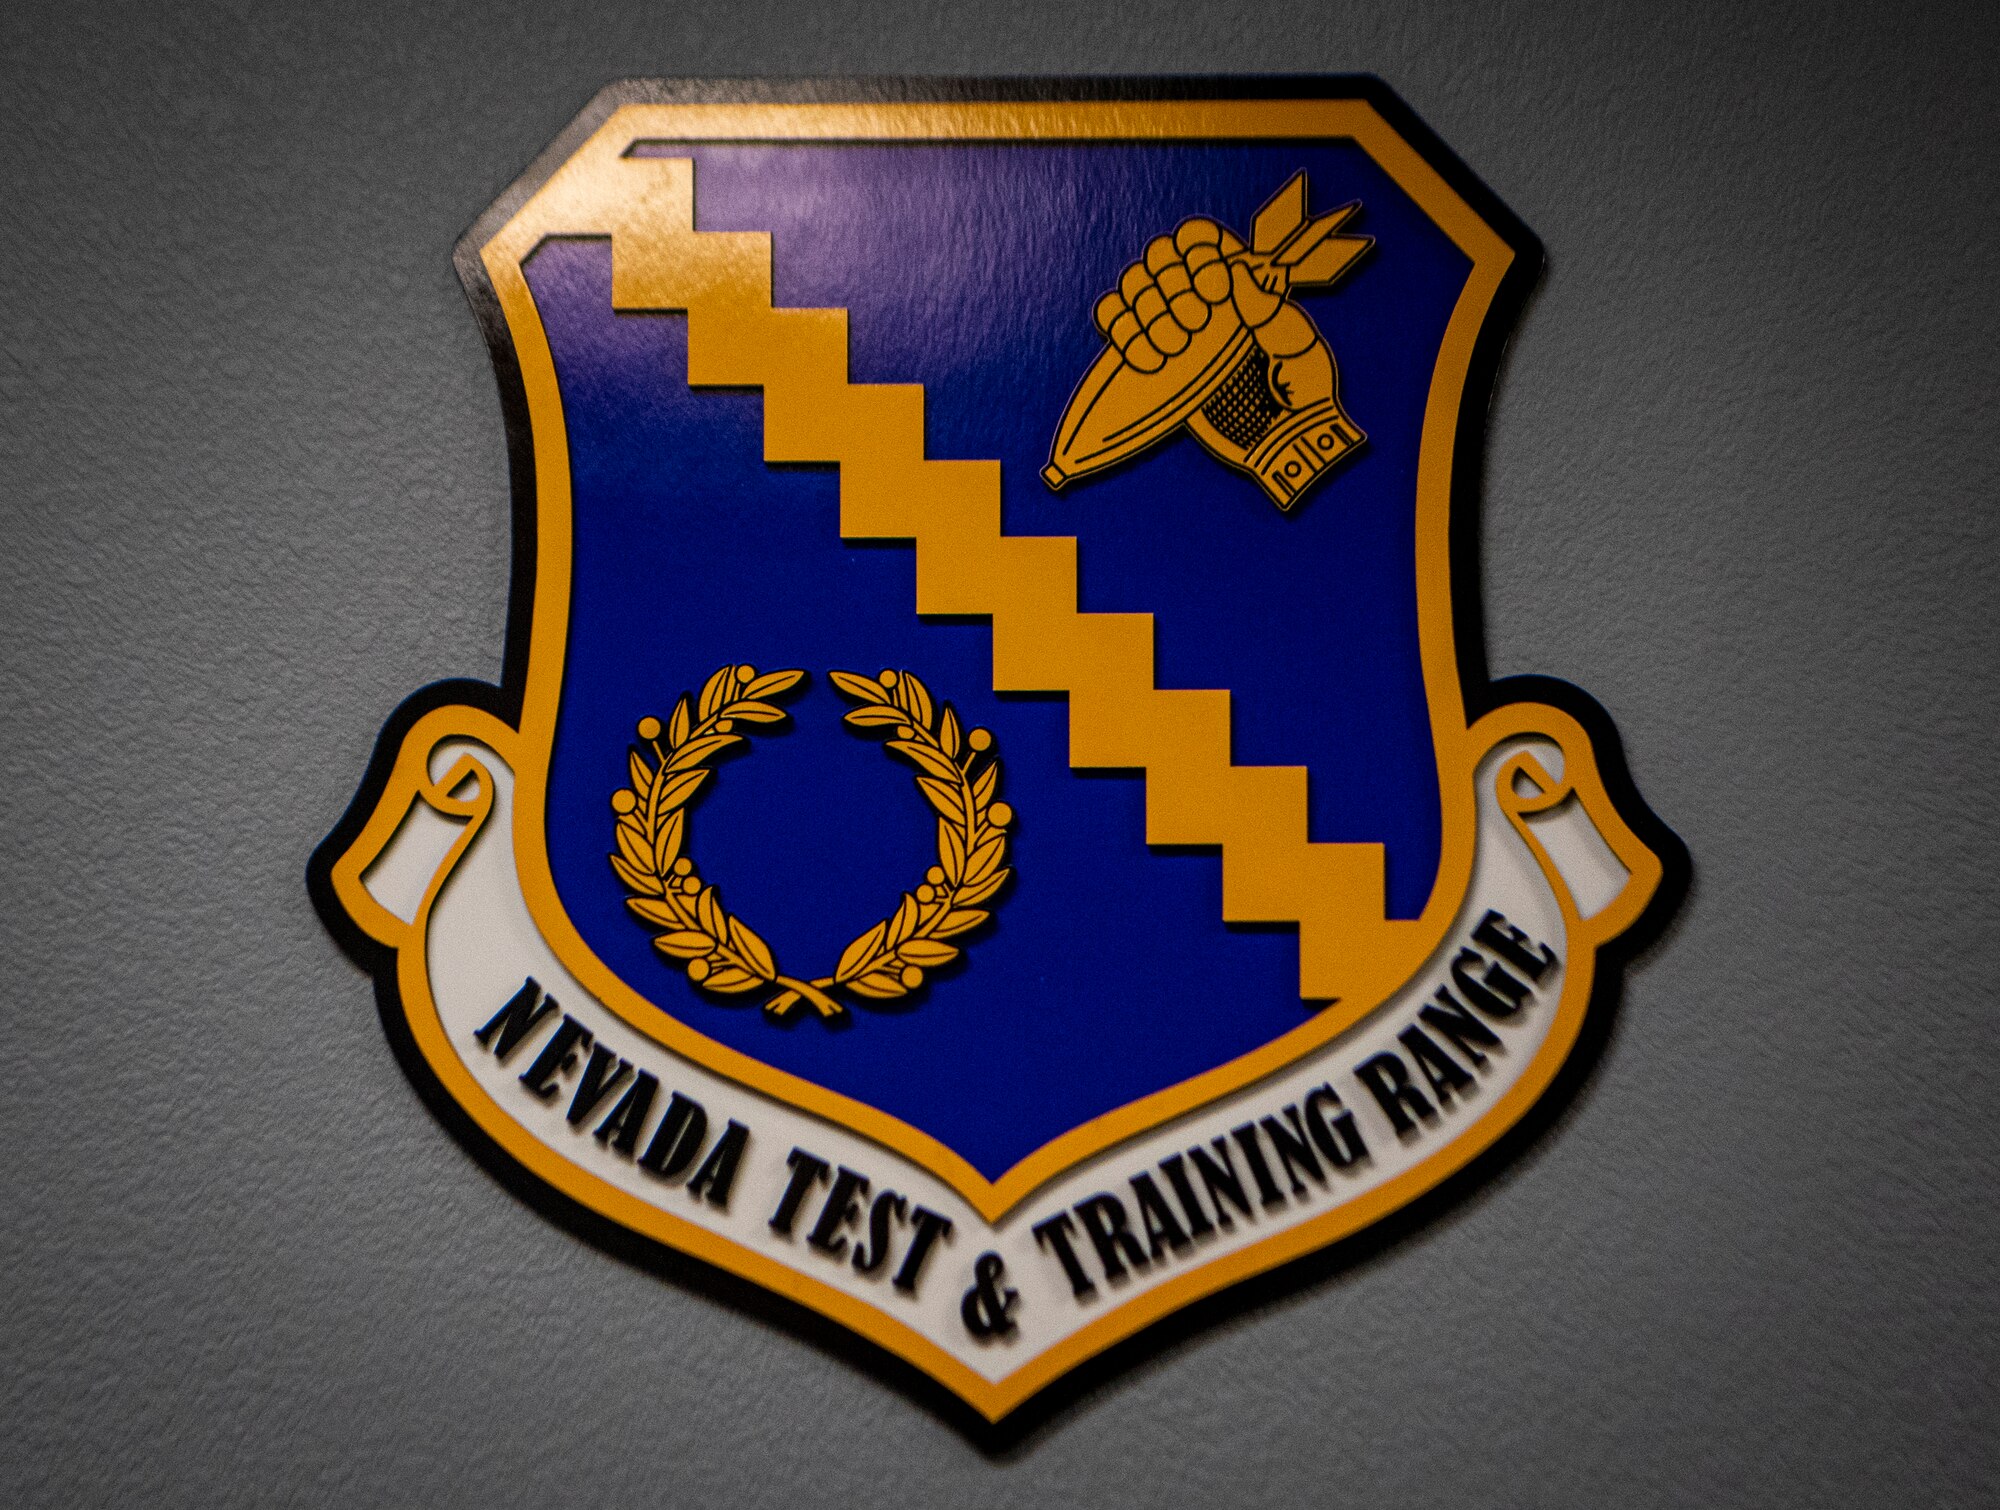 Nevada Test and Training Range crest on a wall.